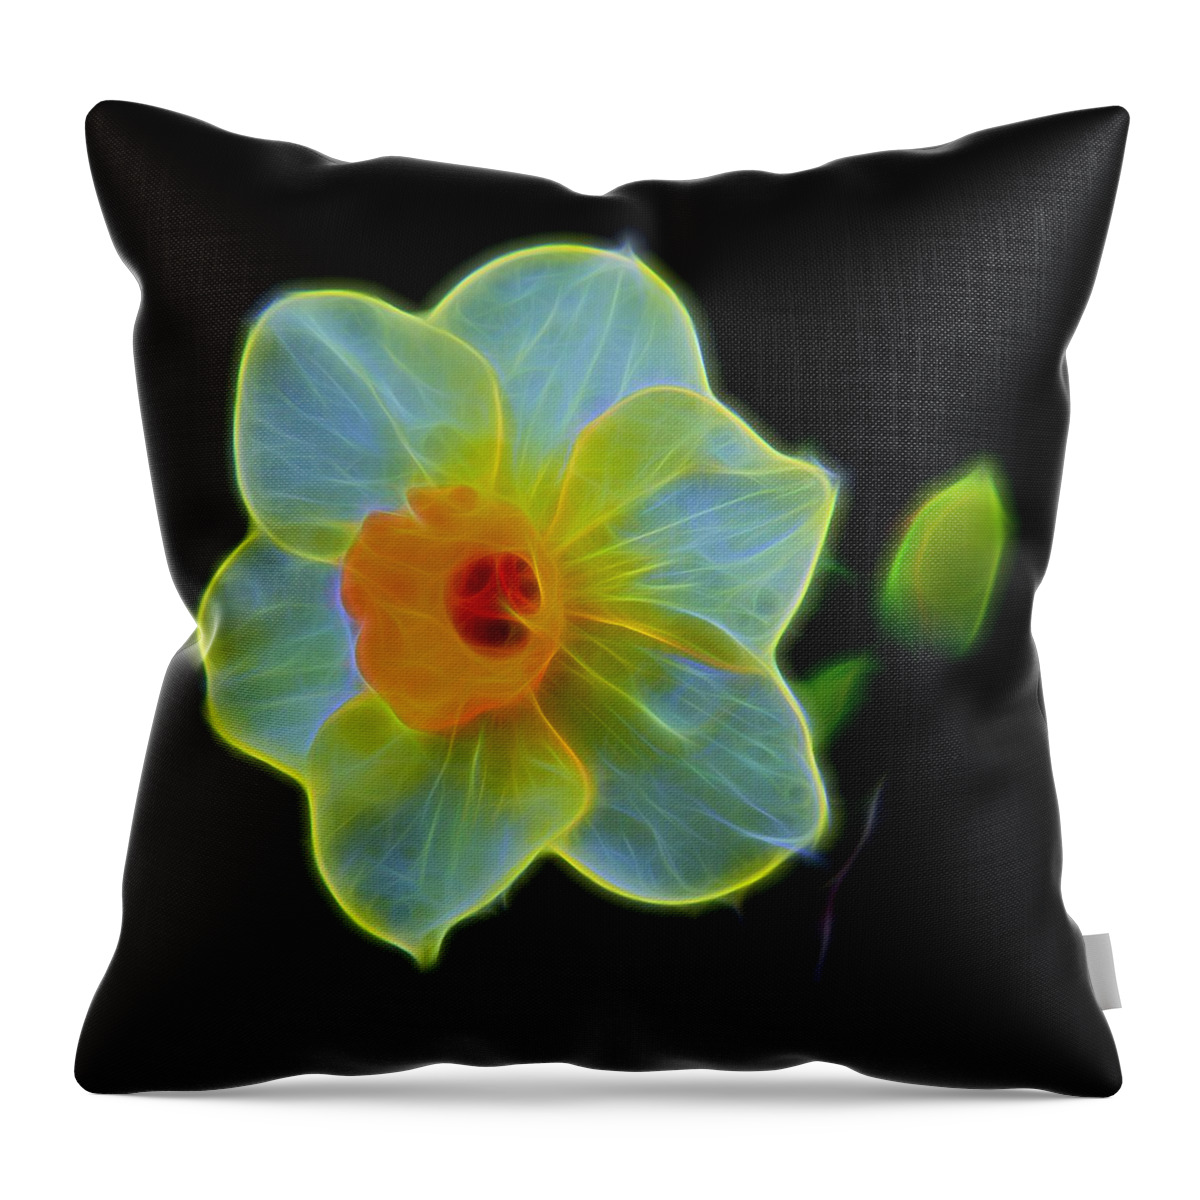 Incandescent Throw Pillow featuring the photograph Incandescent by Judy Vincent